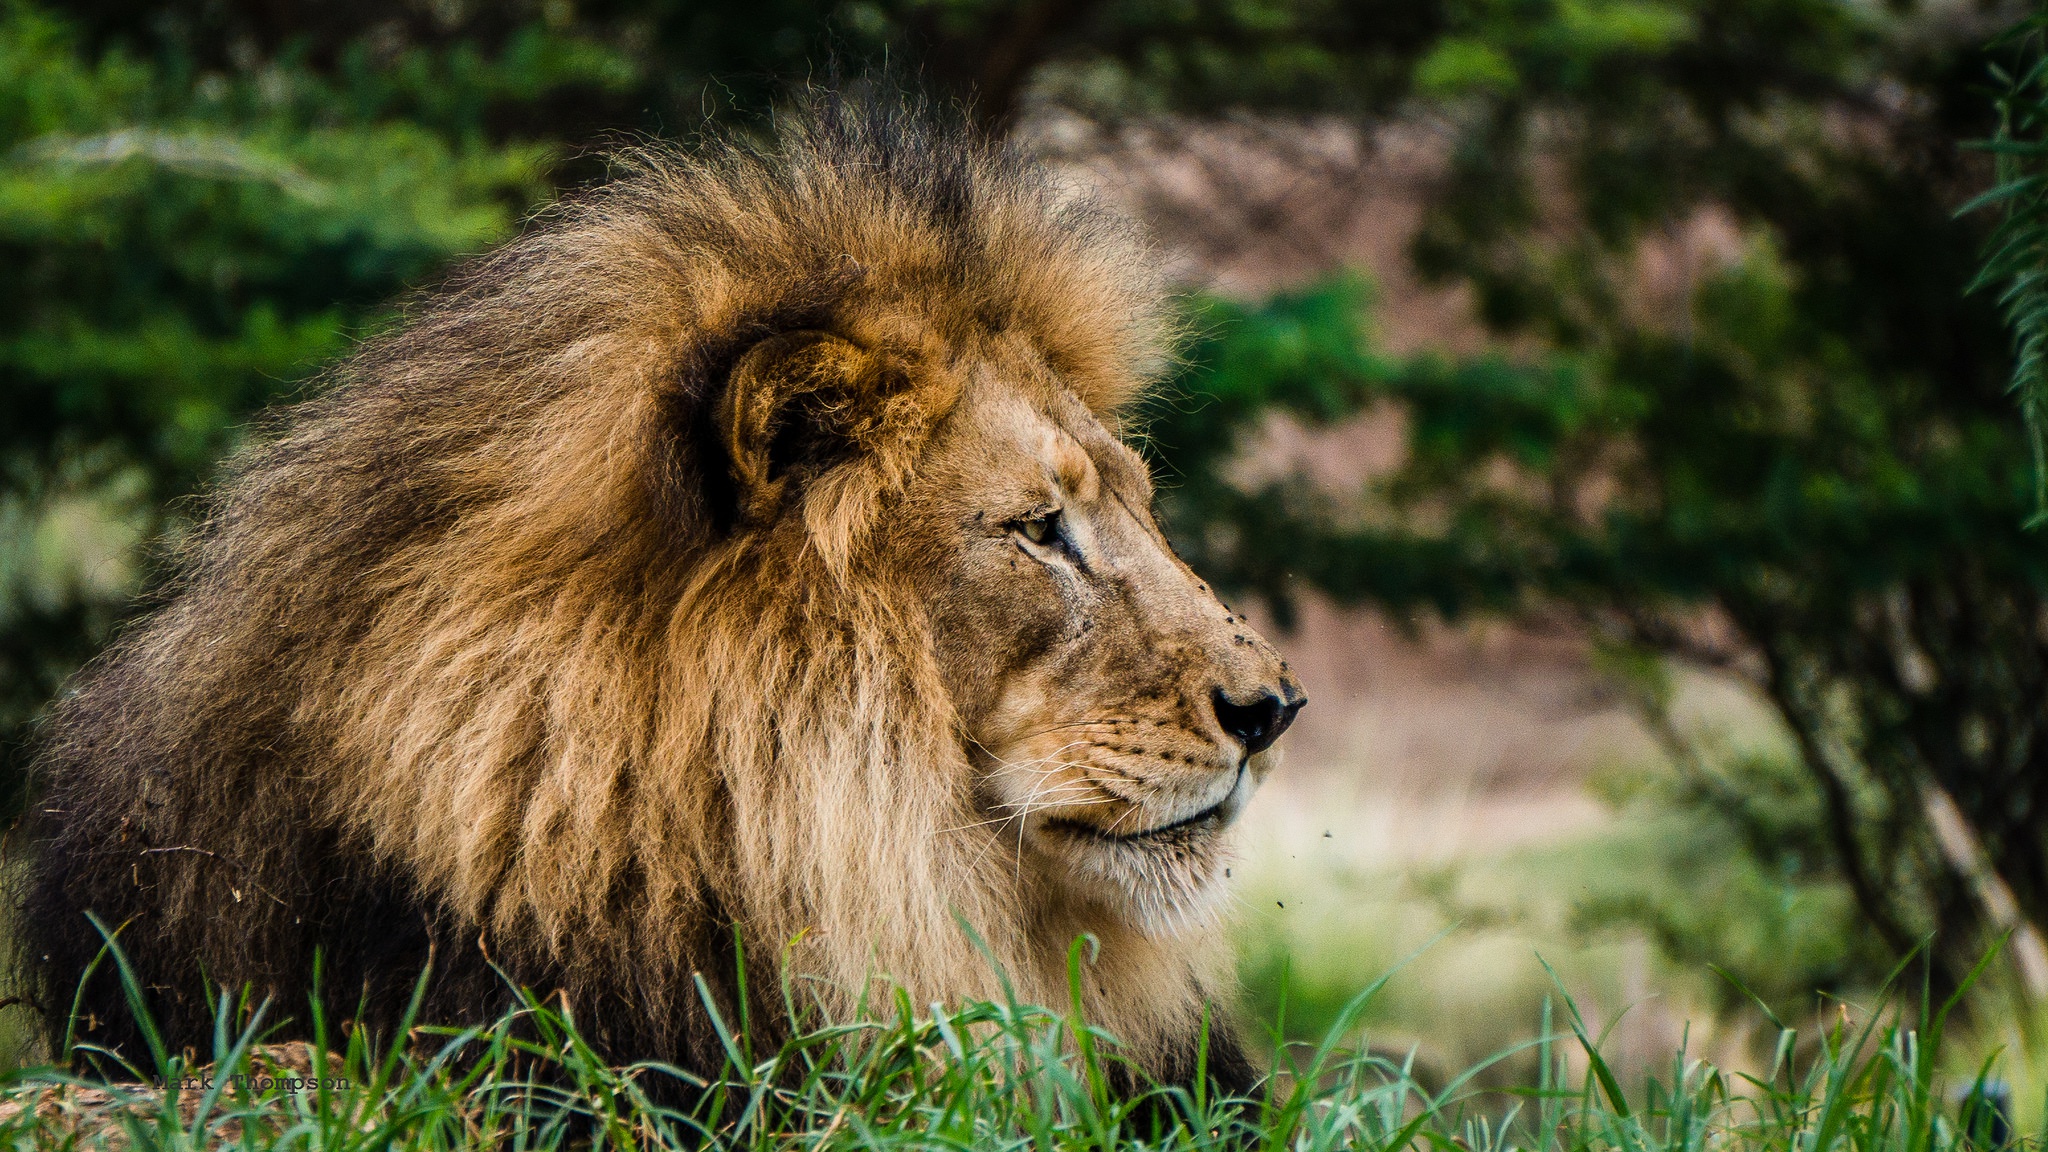 High Quality Background Images Lion - Download lion png images